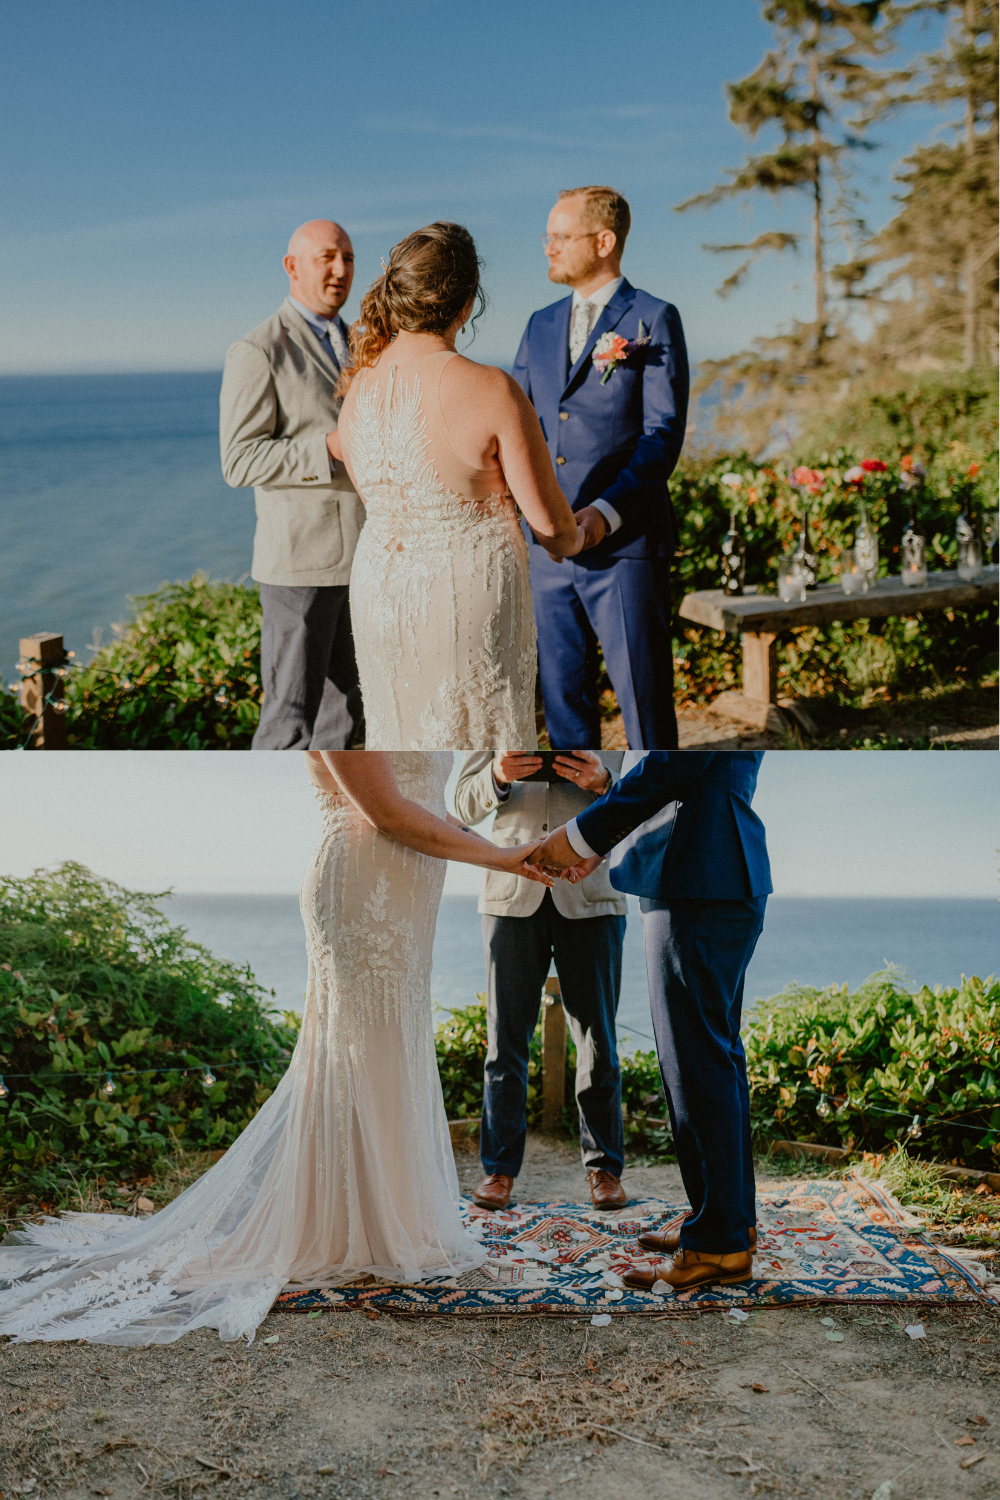 Bride and Groom say their vows cliffside during their Washington Elopement in the Pacific Northwest | Washington State Elopement Photographer, Seattle Elopement Photographer, Newlywed Elopement Photographer, Quarantine Wedding Elopement Inspiration | chelseaabril.com